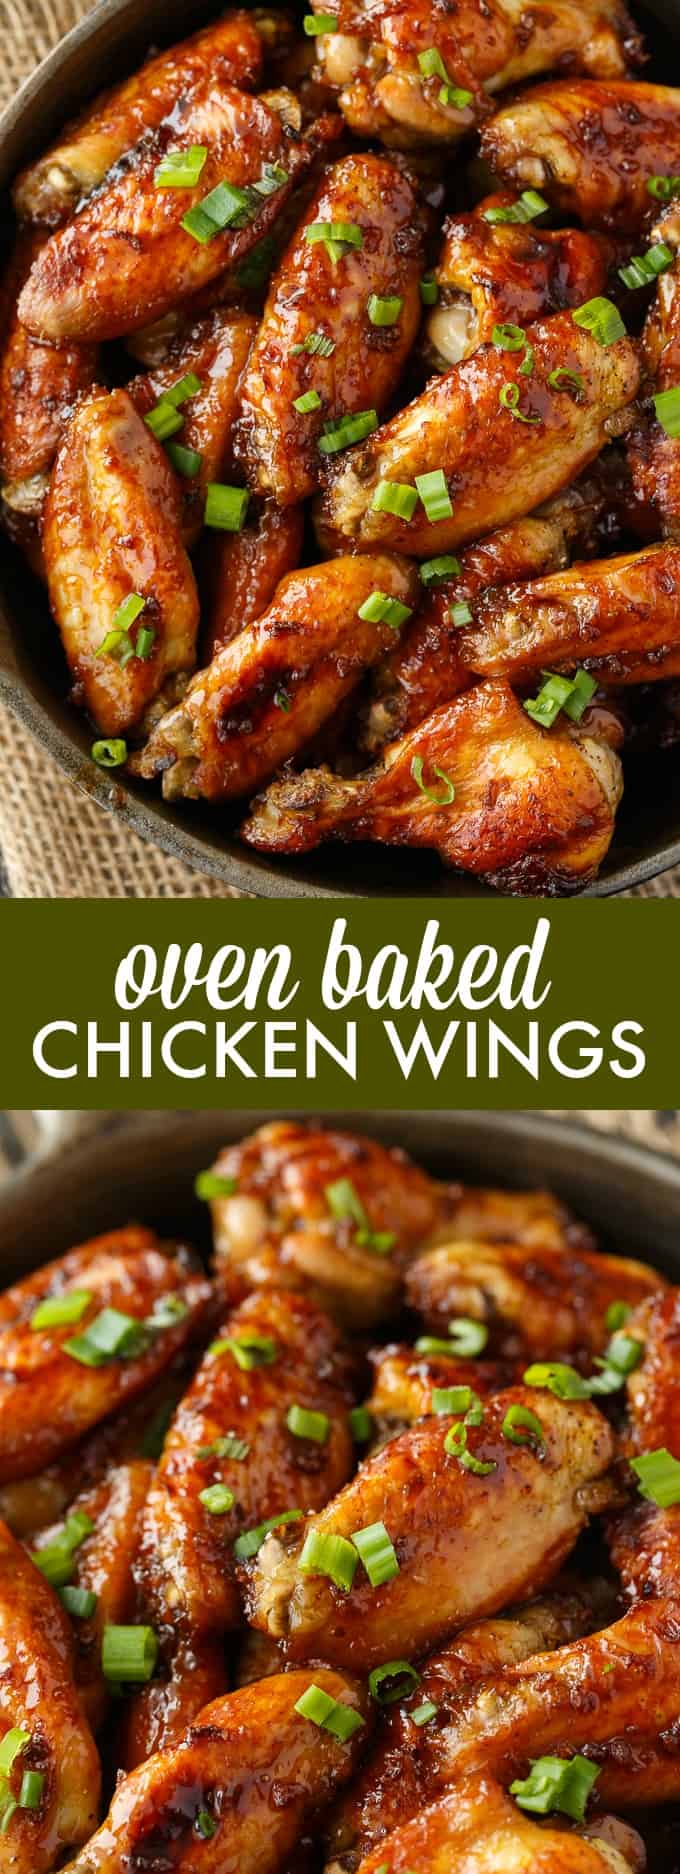 Oven Baked Chicken Wings - The BEST wing recipe ever! Juicy chicken wings are oven baked in a flavorful honey garlic sauce.